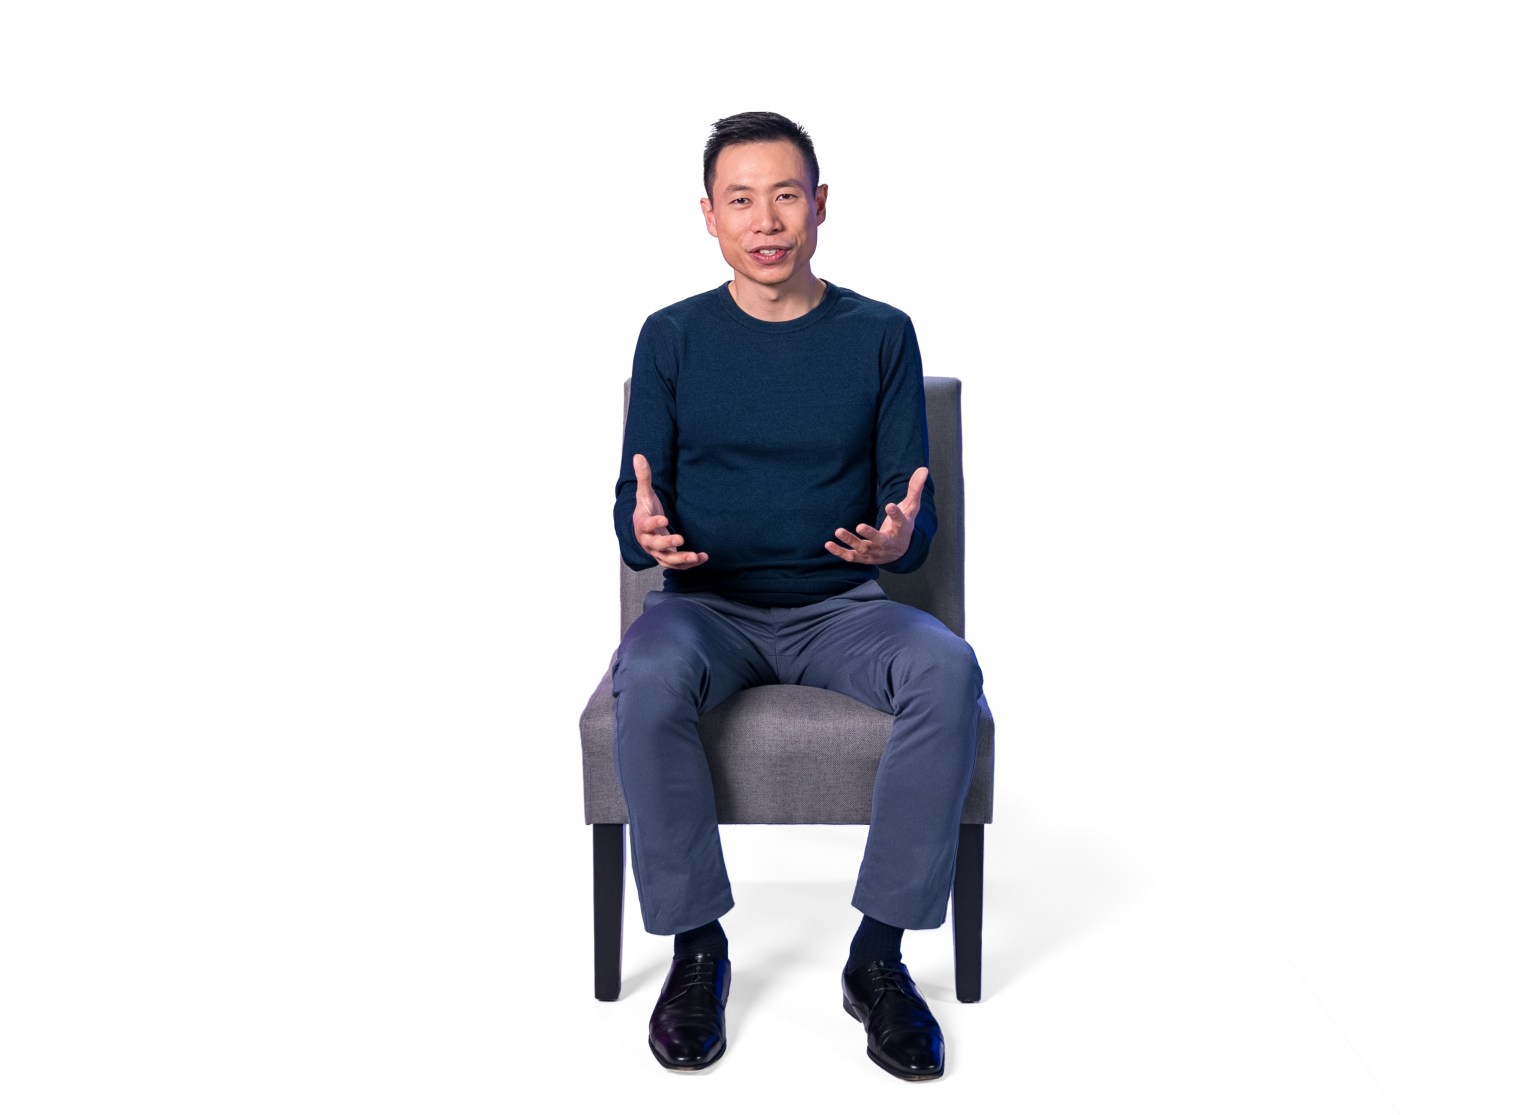 A man sitting on a chair with his hands in his pockets.